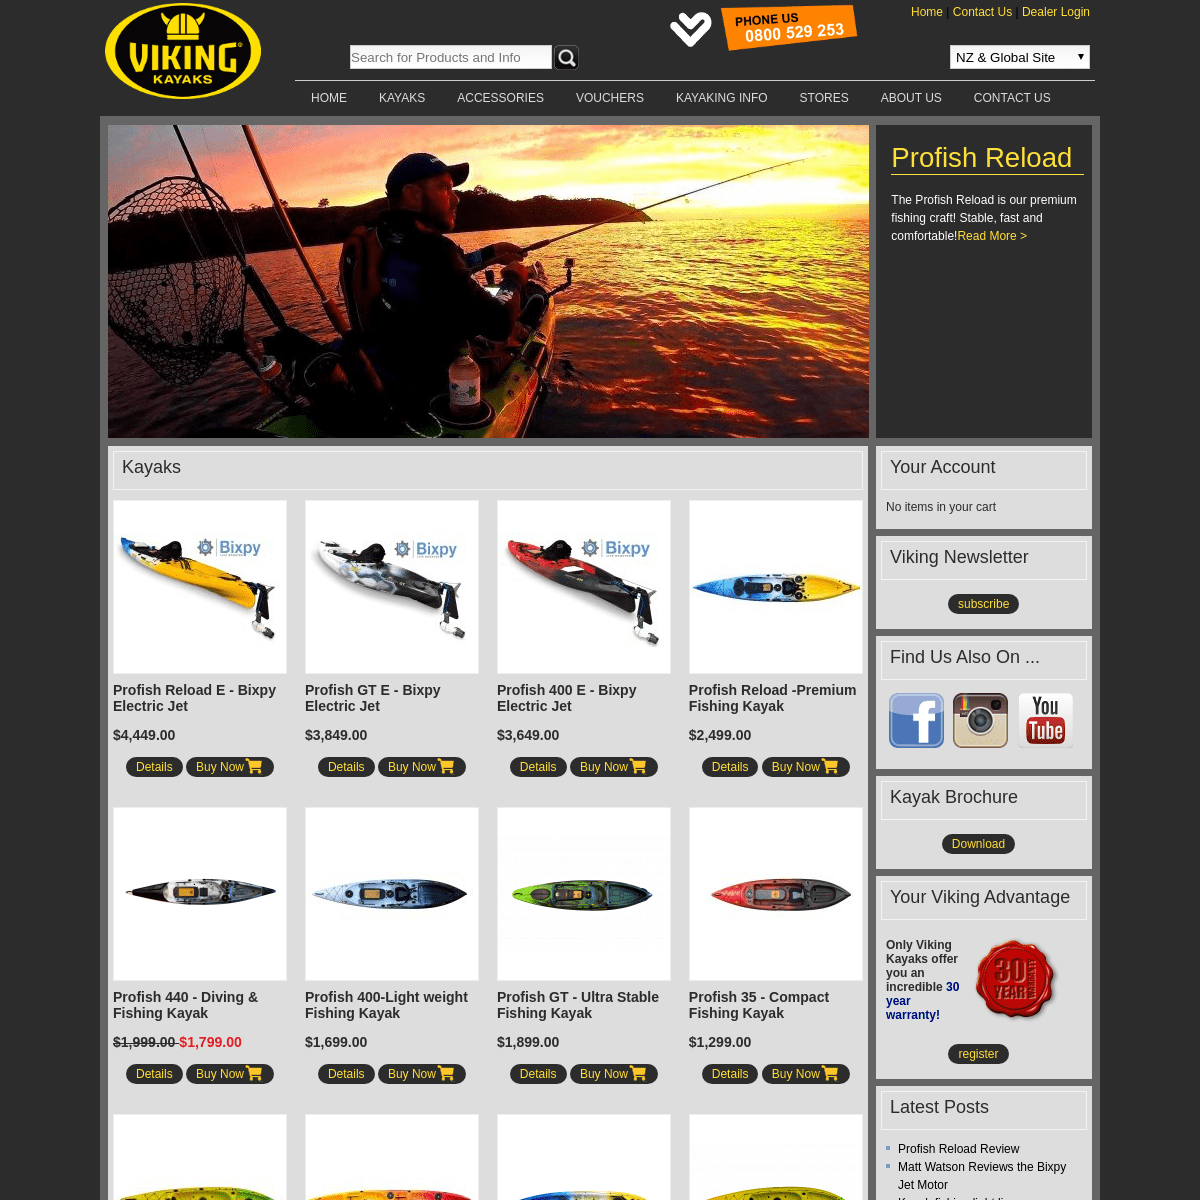 A complete backup of vikingkayaks.co.nz